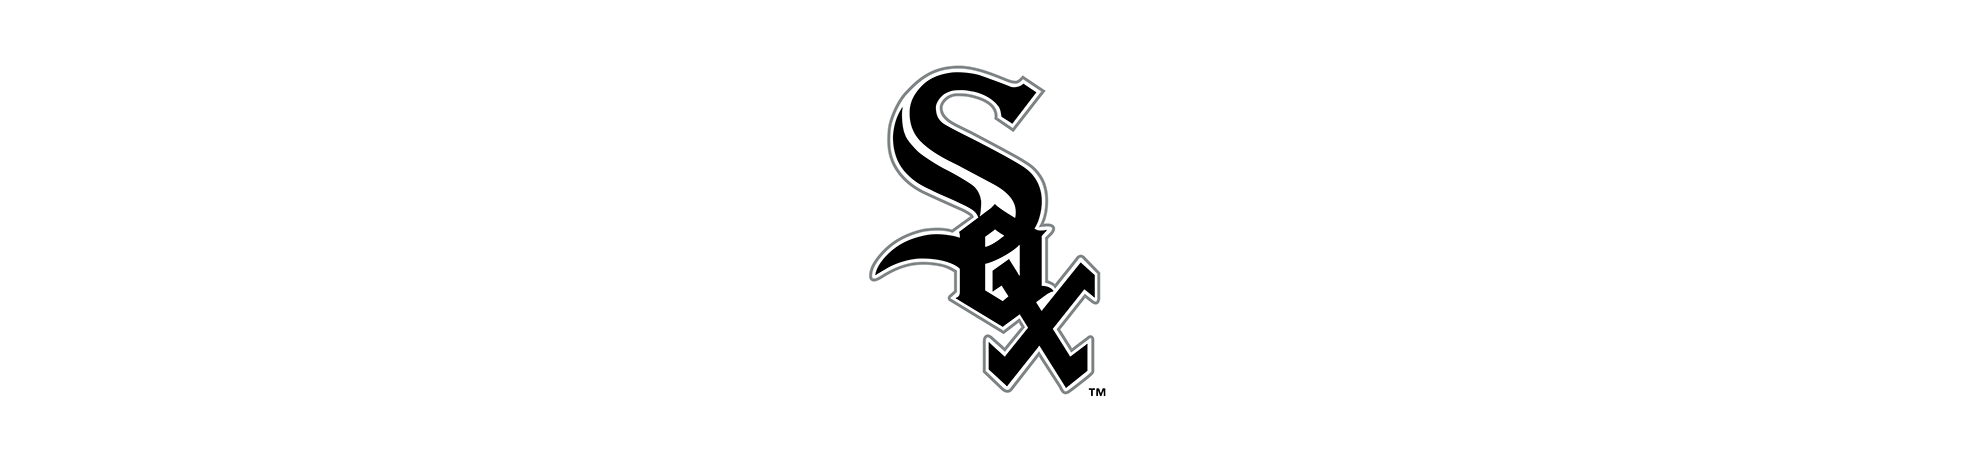 Chicago White Sox Transparent PNG